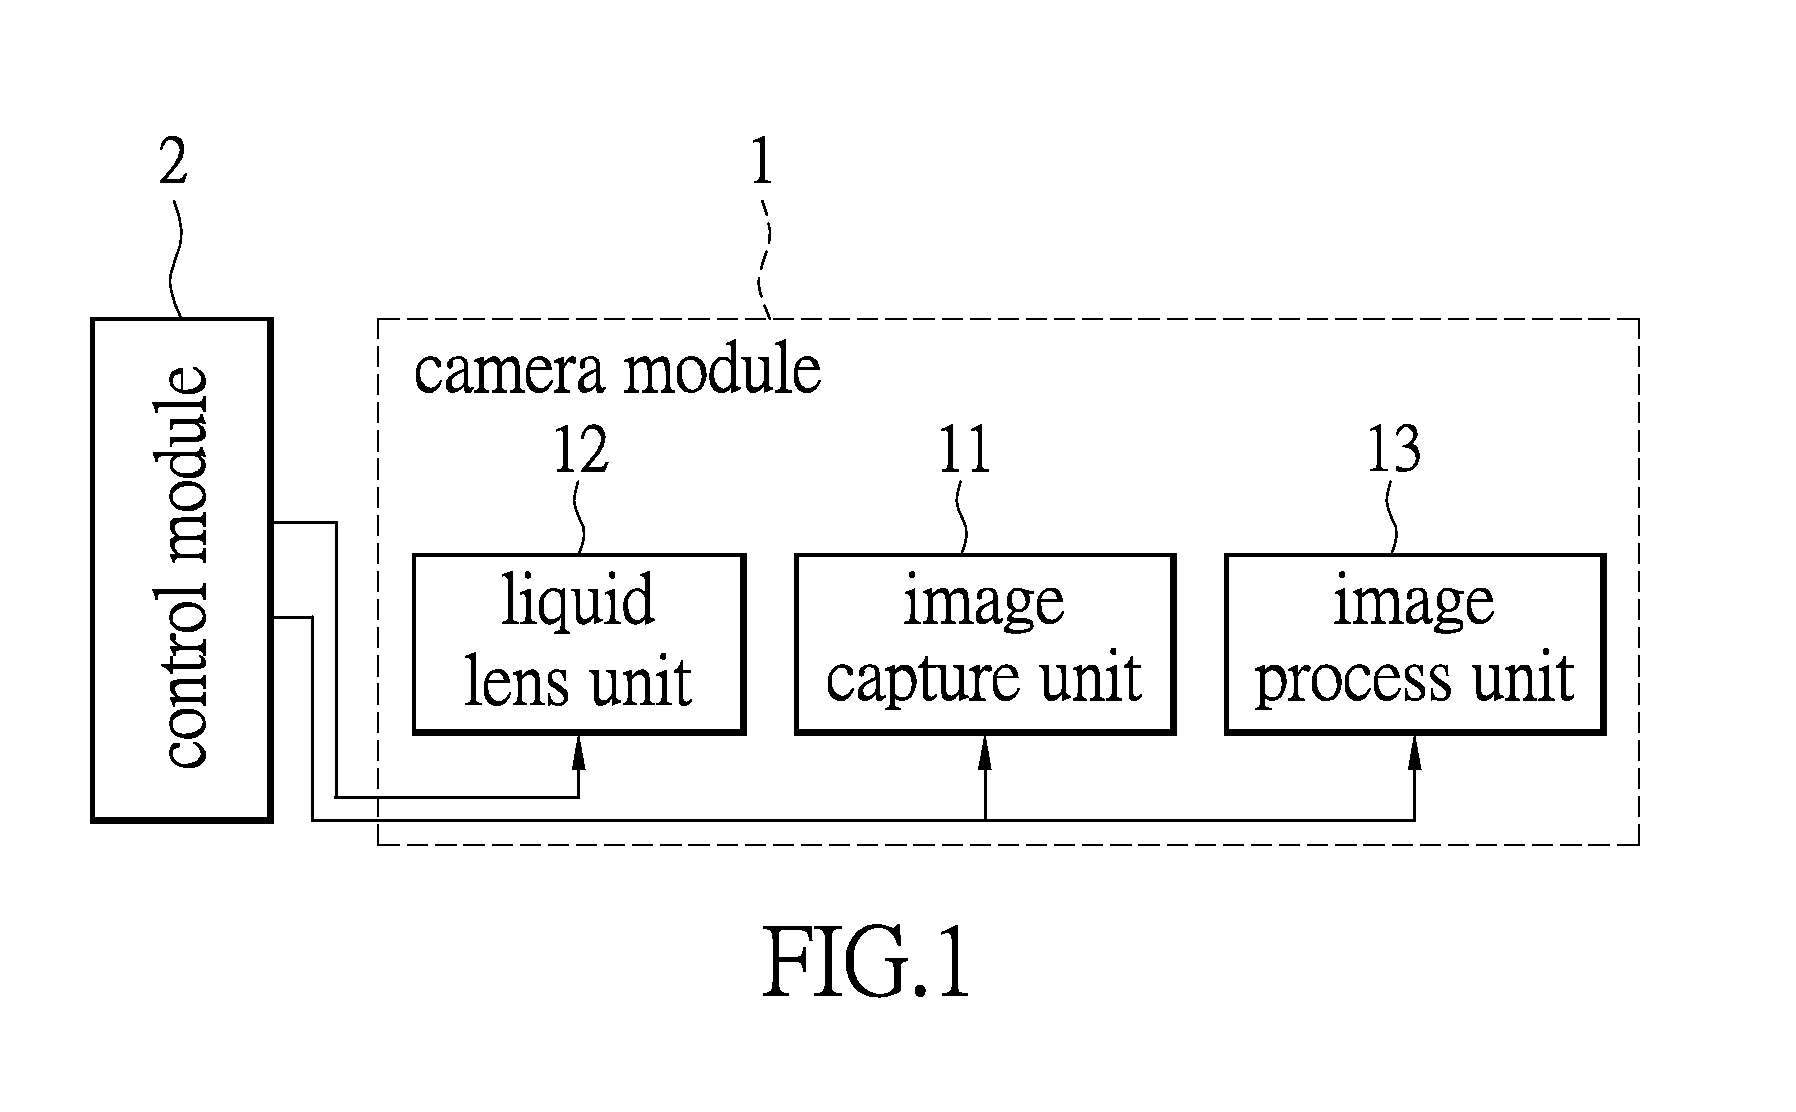 Method of capturing images